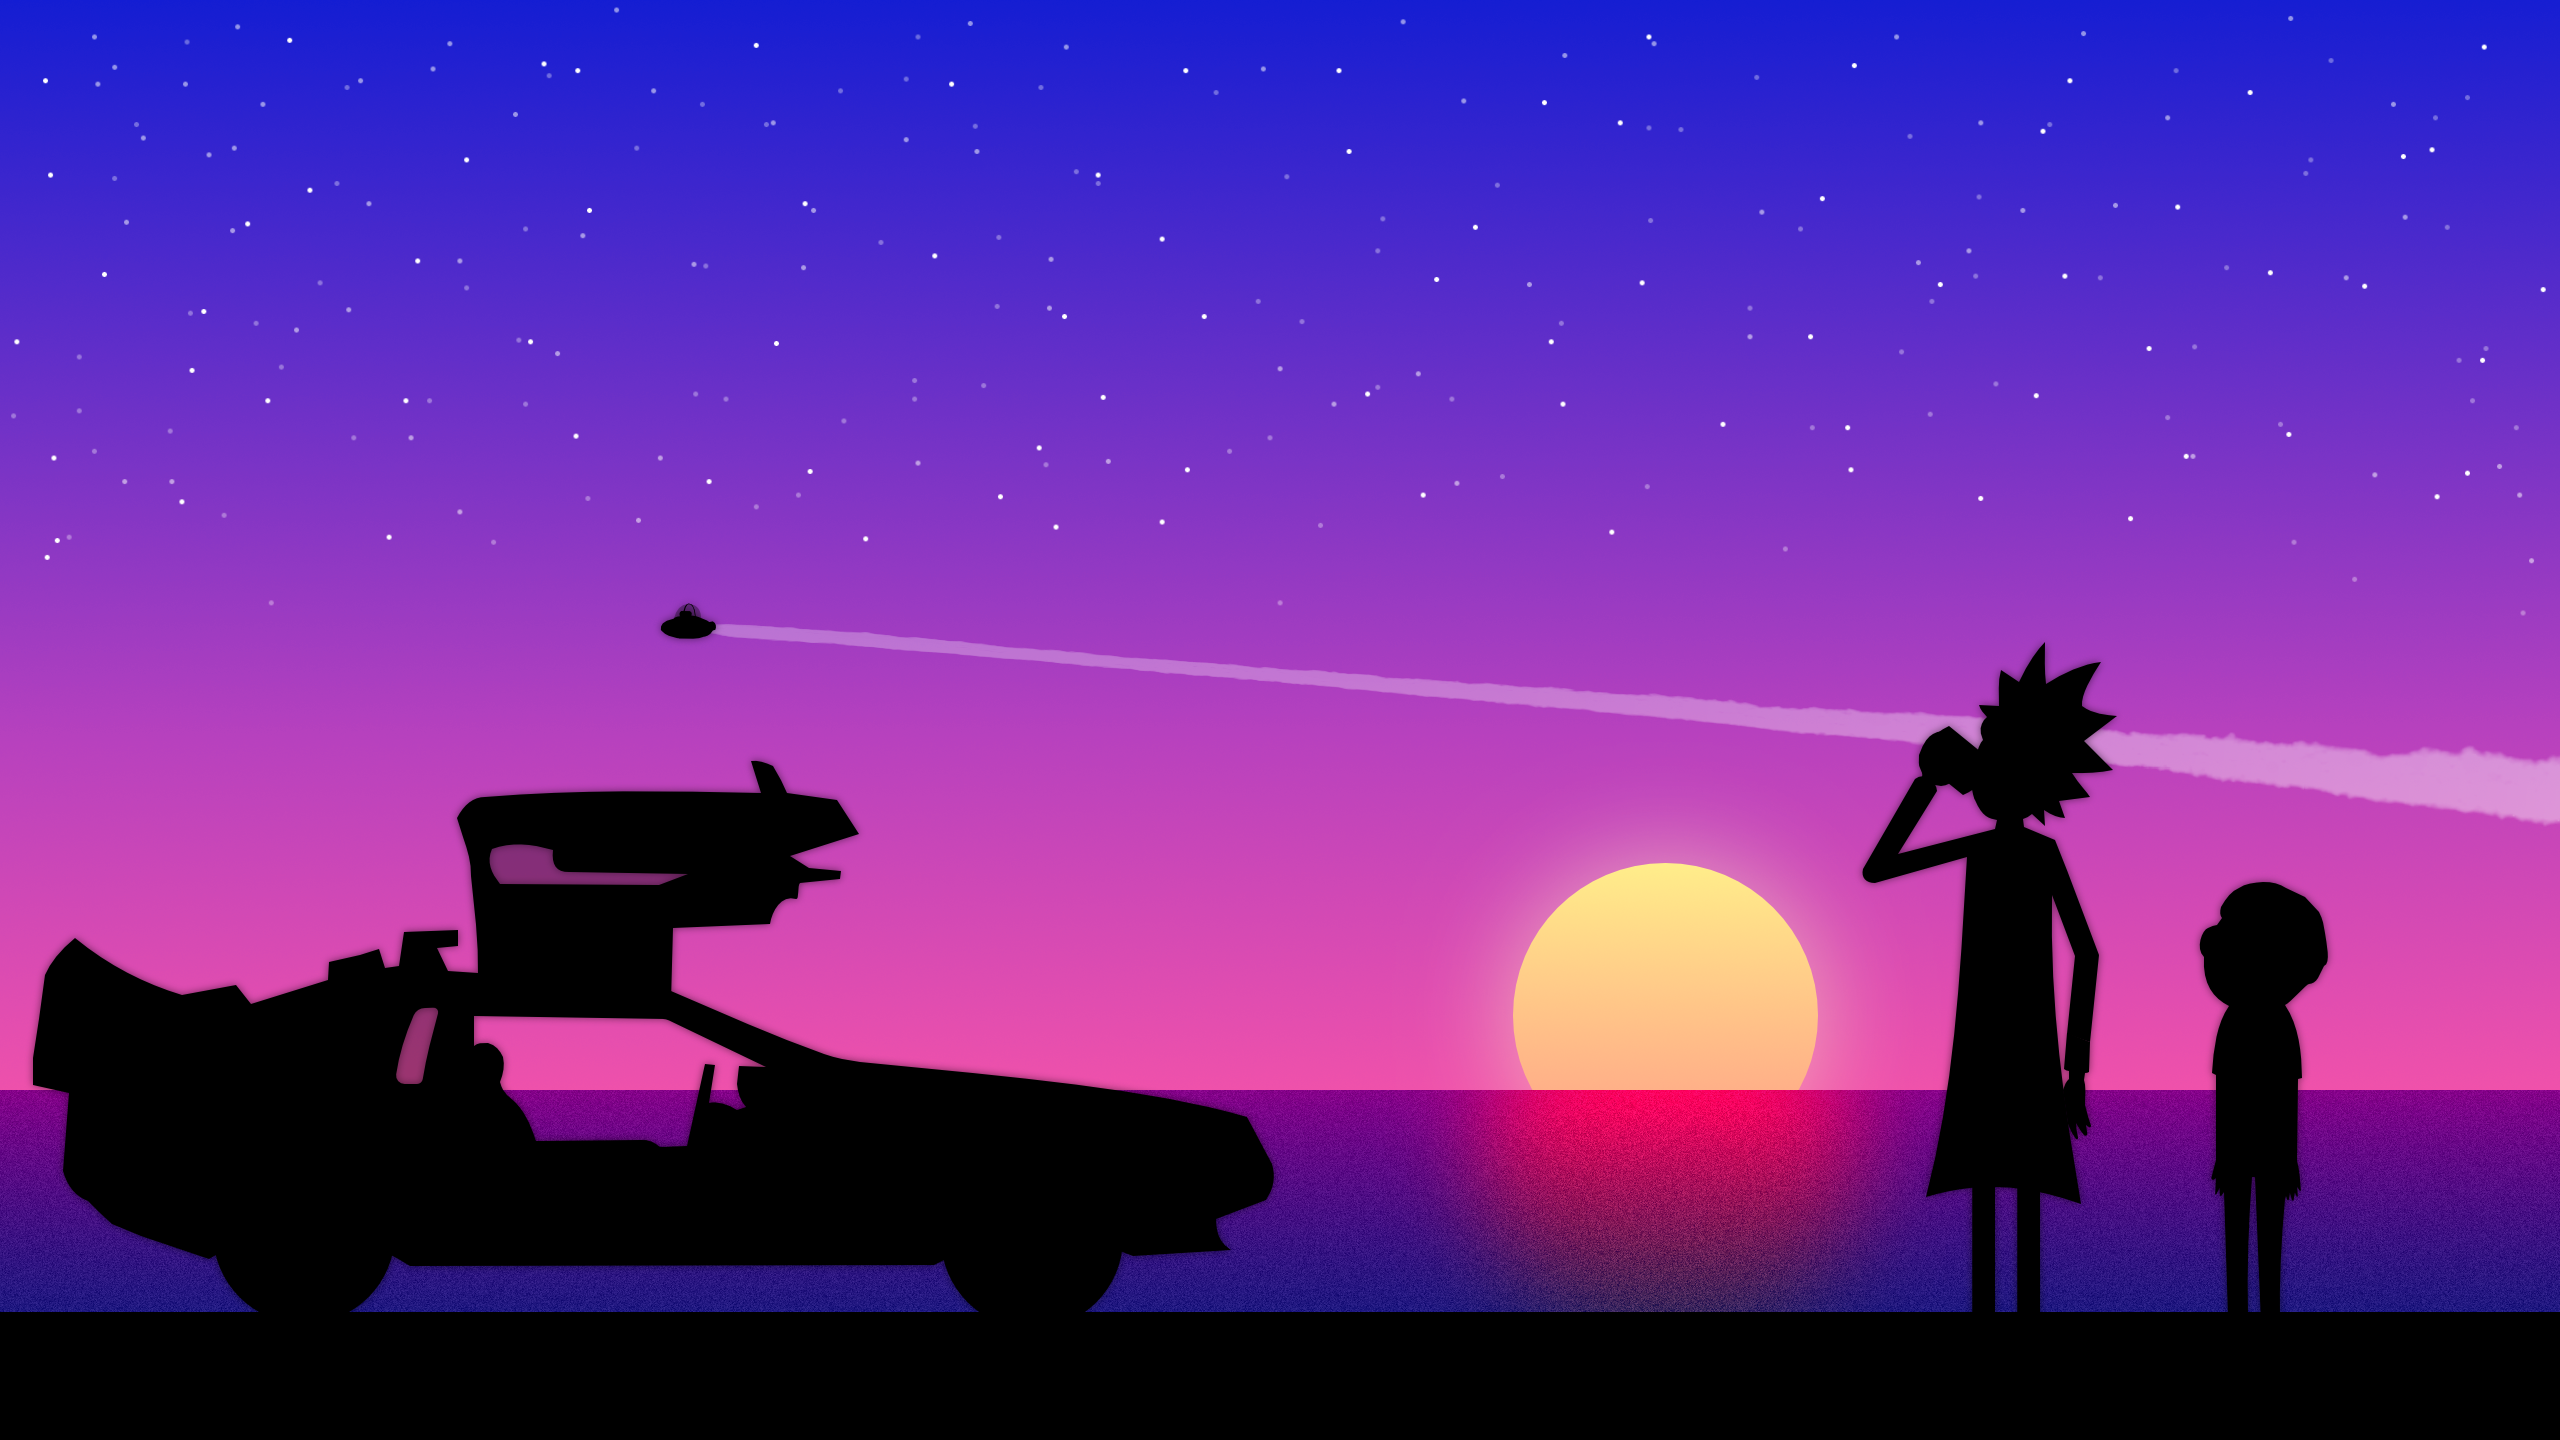 Caricature Rick And Morty Car DeLorean Time Machine Sunset Silhouette 2560x1440